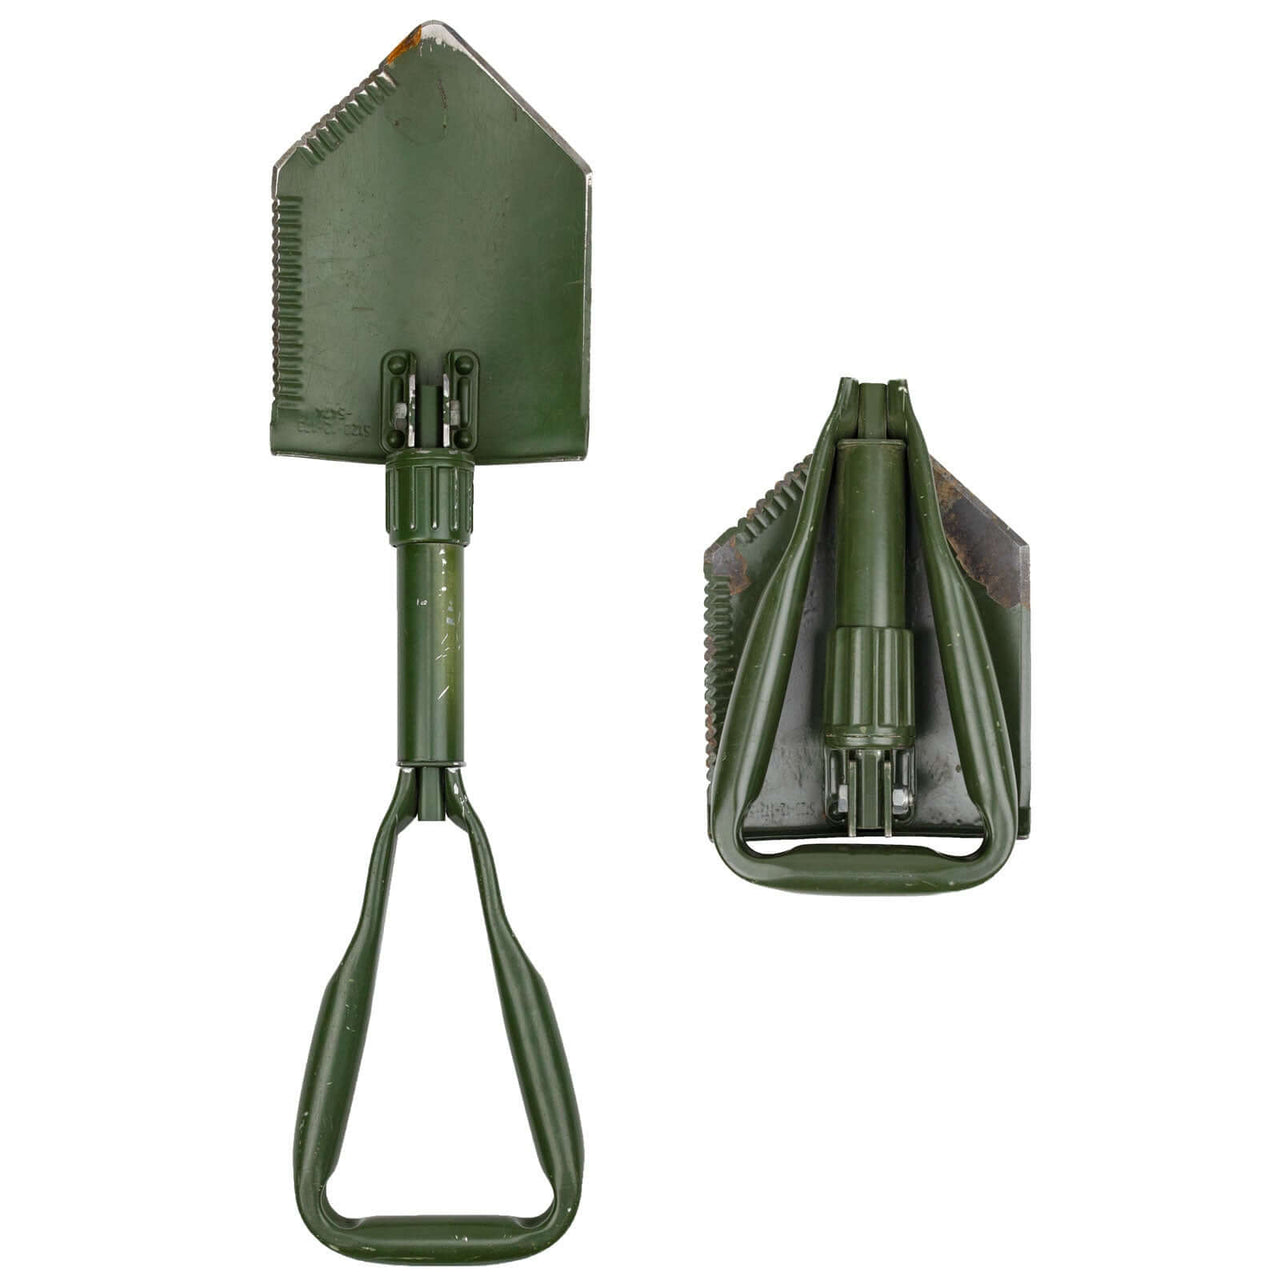 Authentic German Army Tri-Fold Shovel (Used)